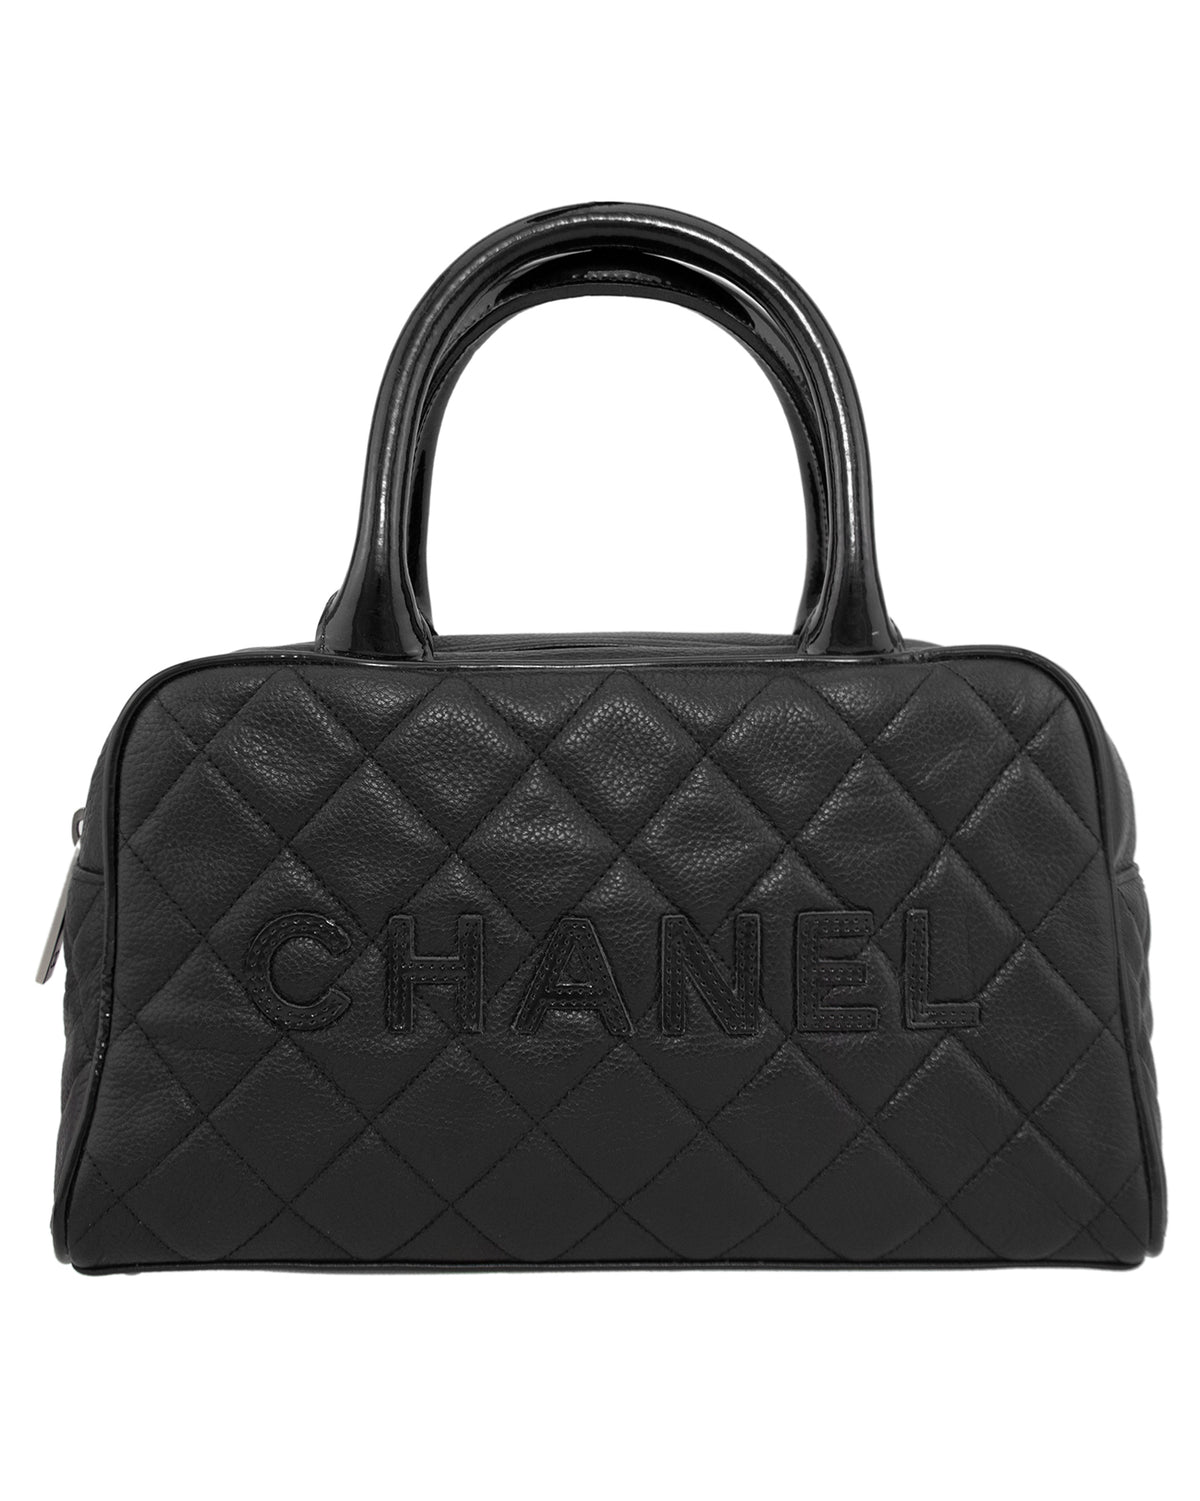 Chanel Black Quilted Lambskin Boston Duffle Bag with Strap 1110c8